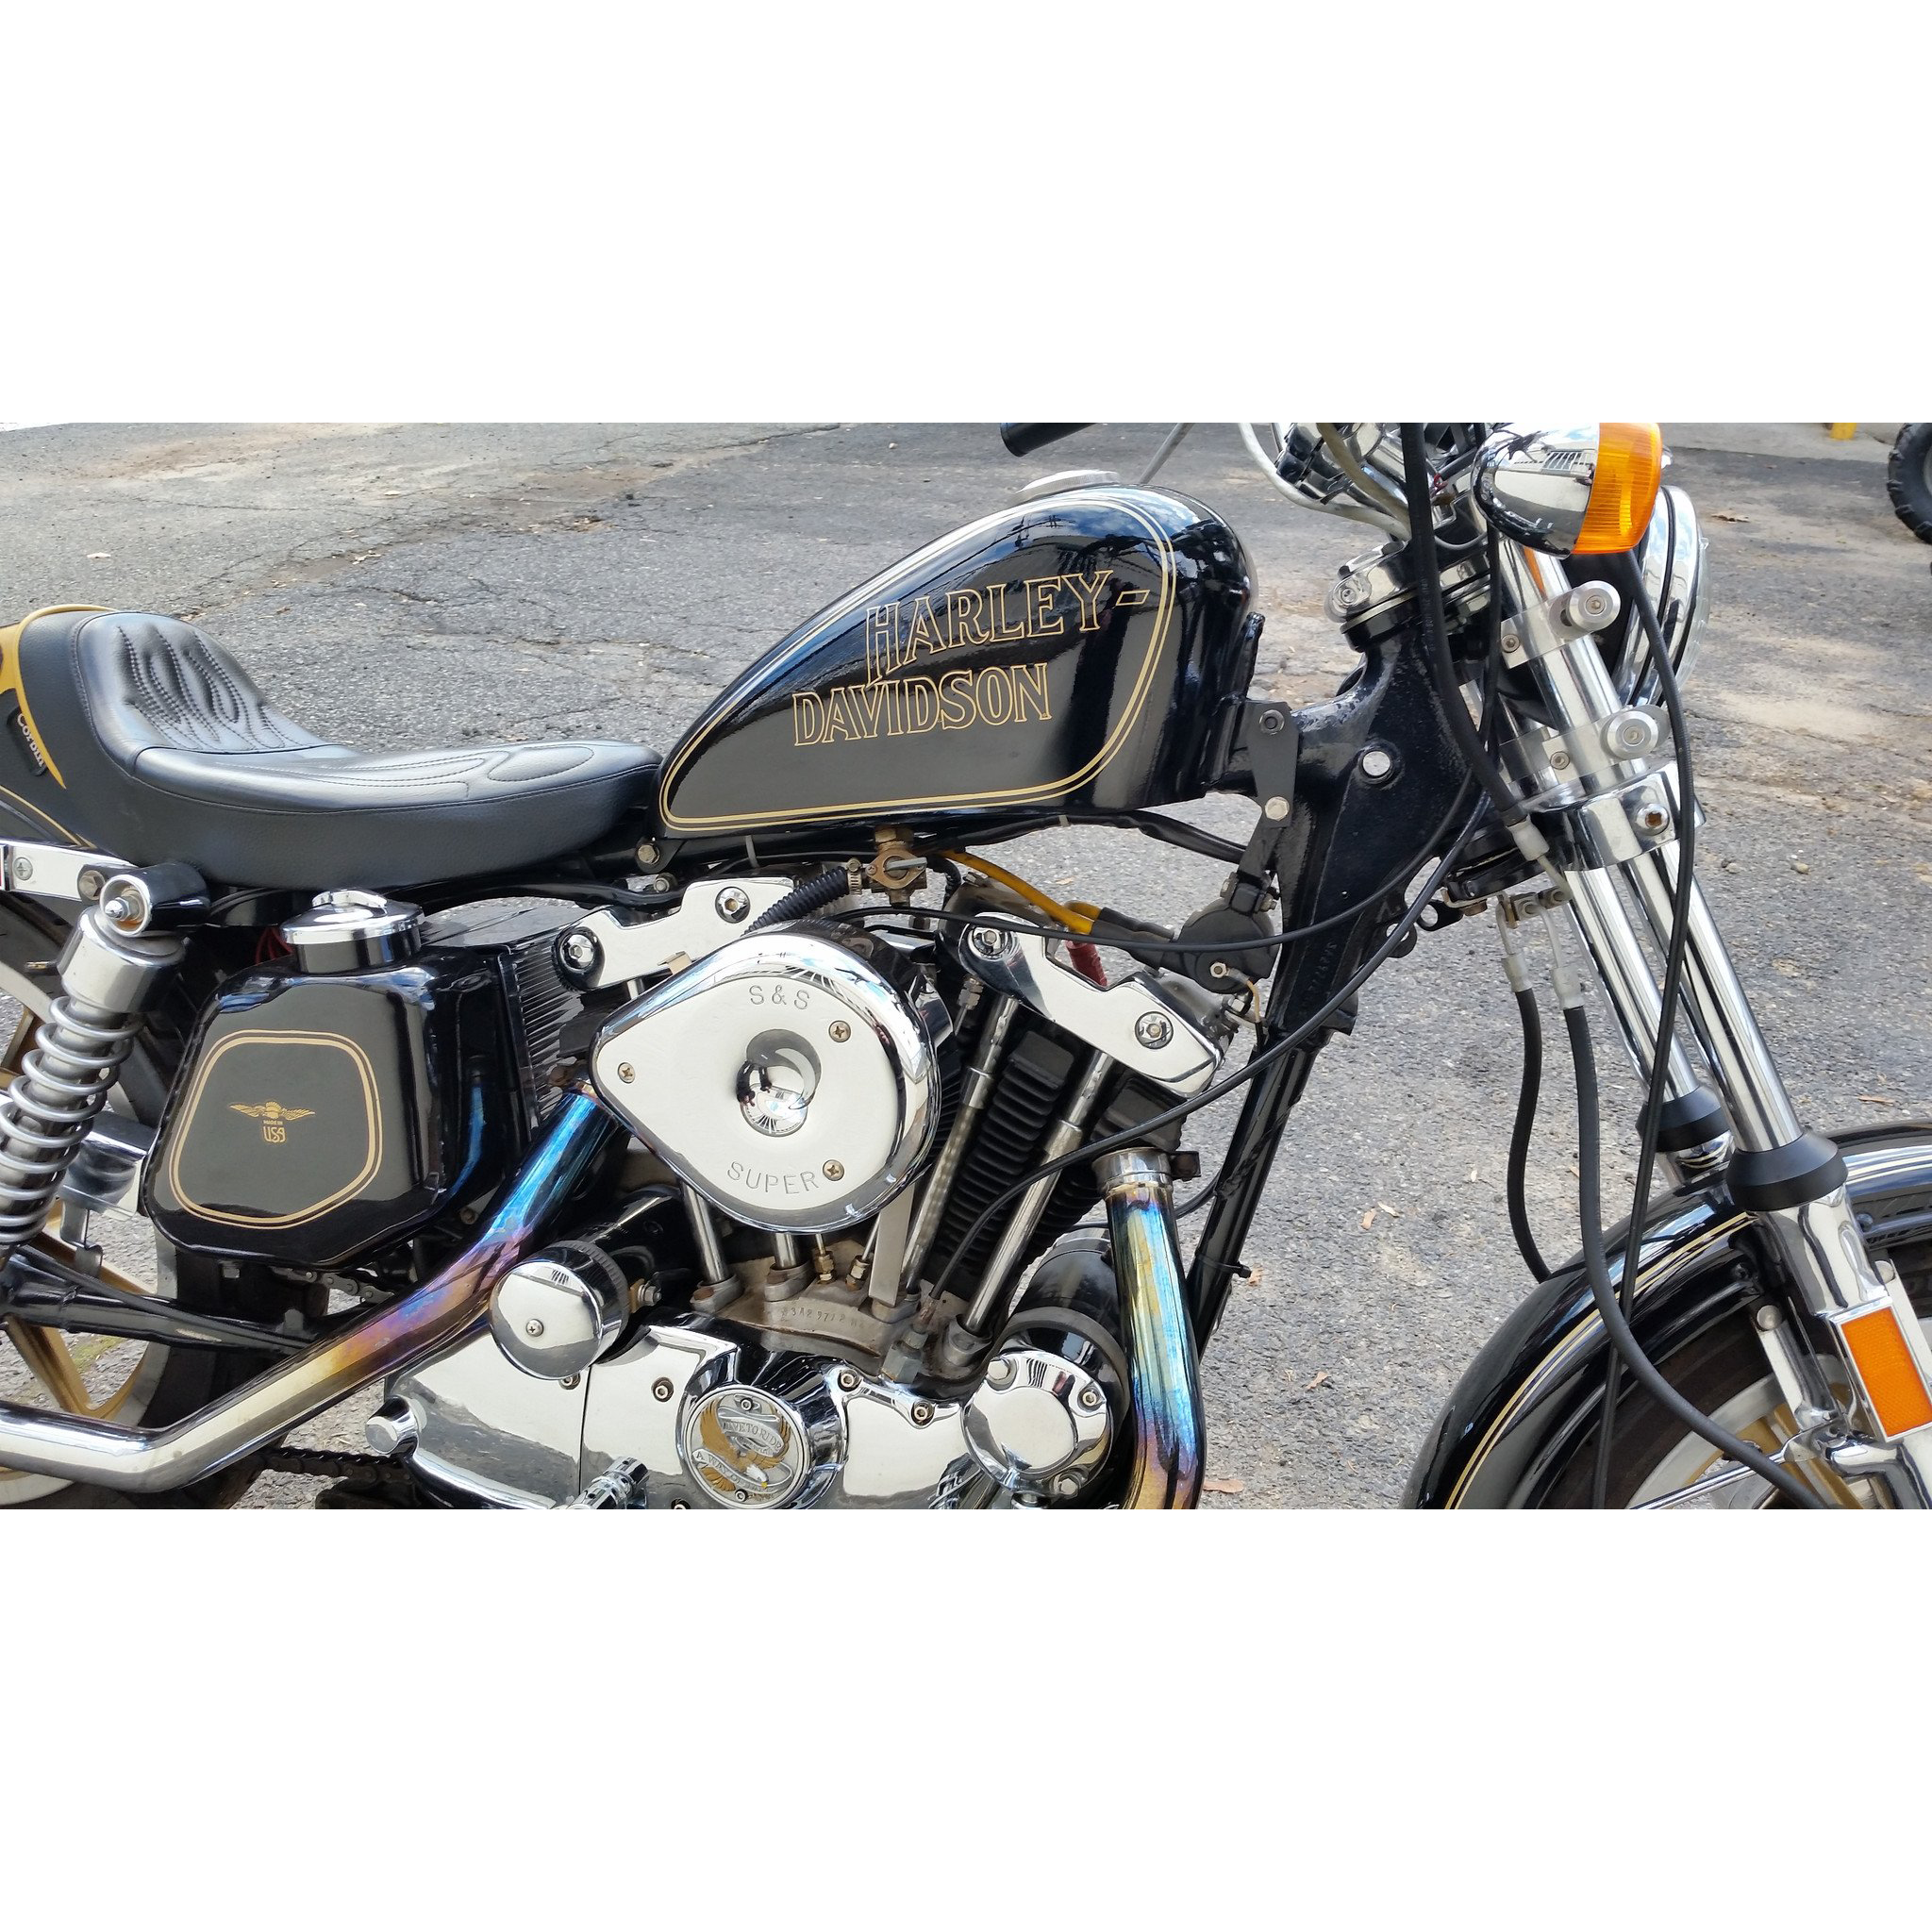 Gas Tank Lift Kit for Ironhead Sportster Models up to 1985